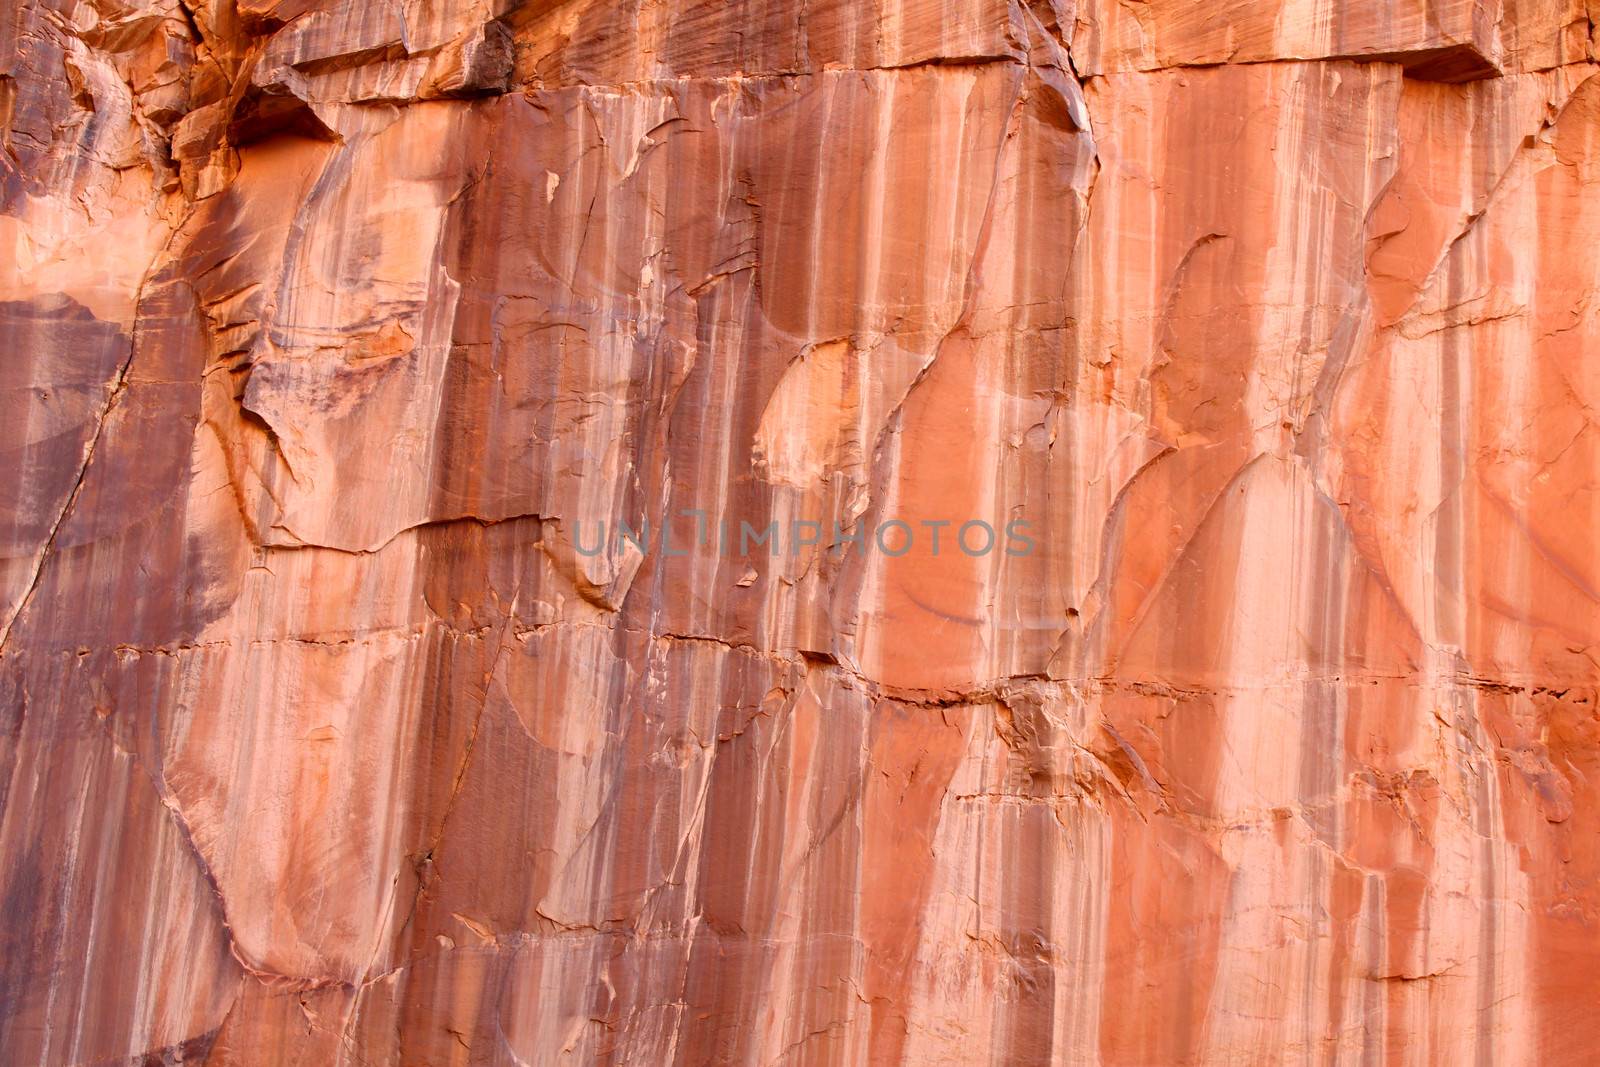 Streaks of color along the Capitol Gorge rock wall of Capitol Reef National Park.